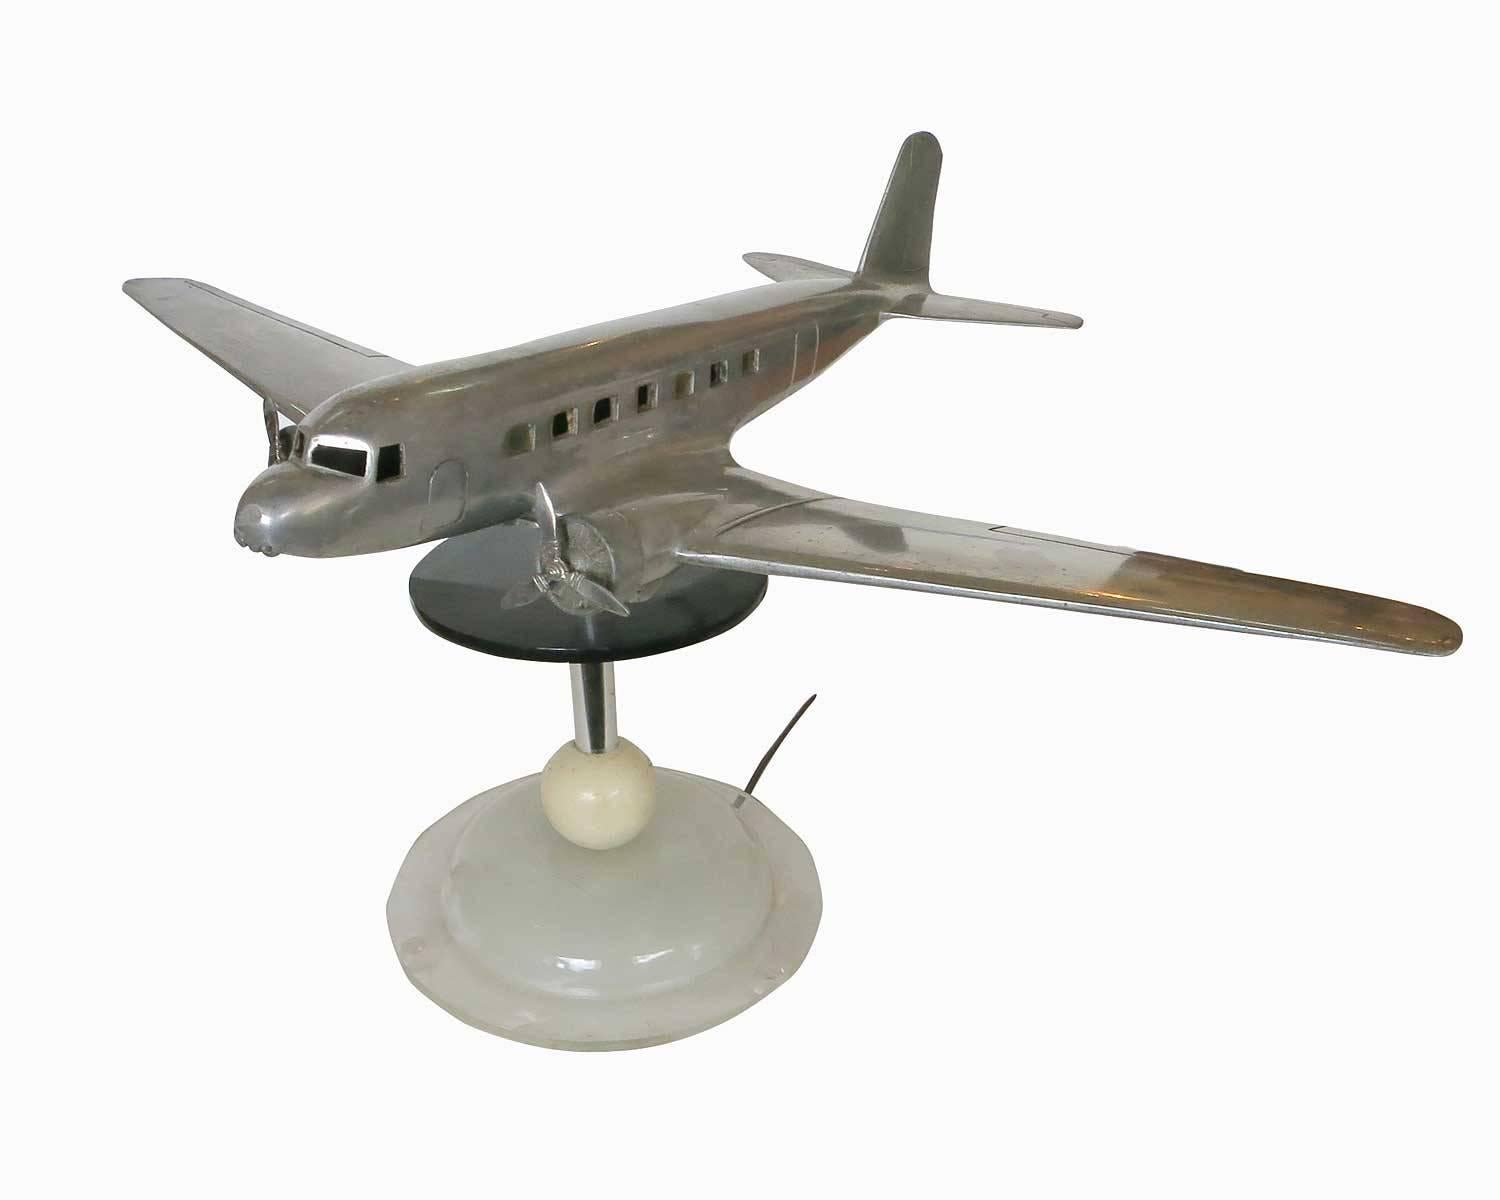 Rare polished aluminum lamp model created for Douglas Aircraft and TWA in 1934 by the Victor F. Patushin Company. The model is constructed of a solid single piece aluminum body with a bottom plate for changing light bulbs and fixing it to the